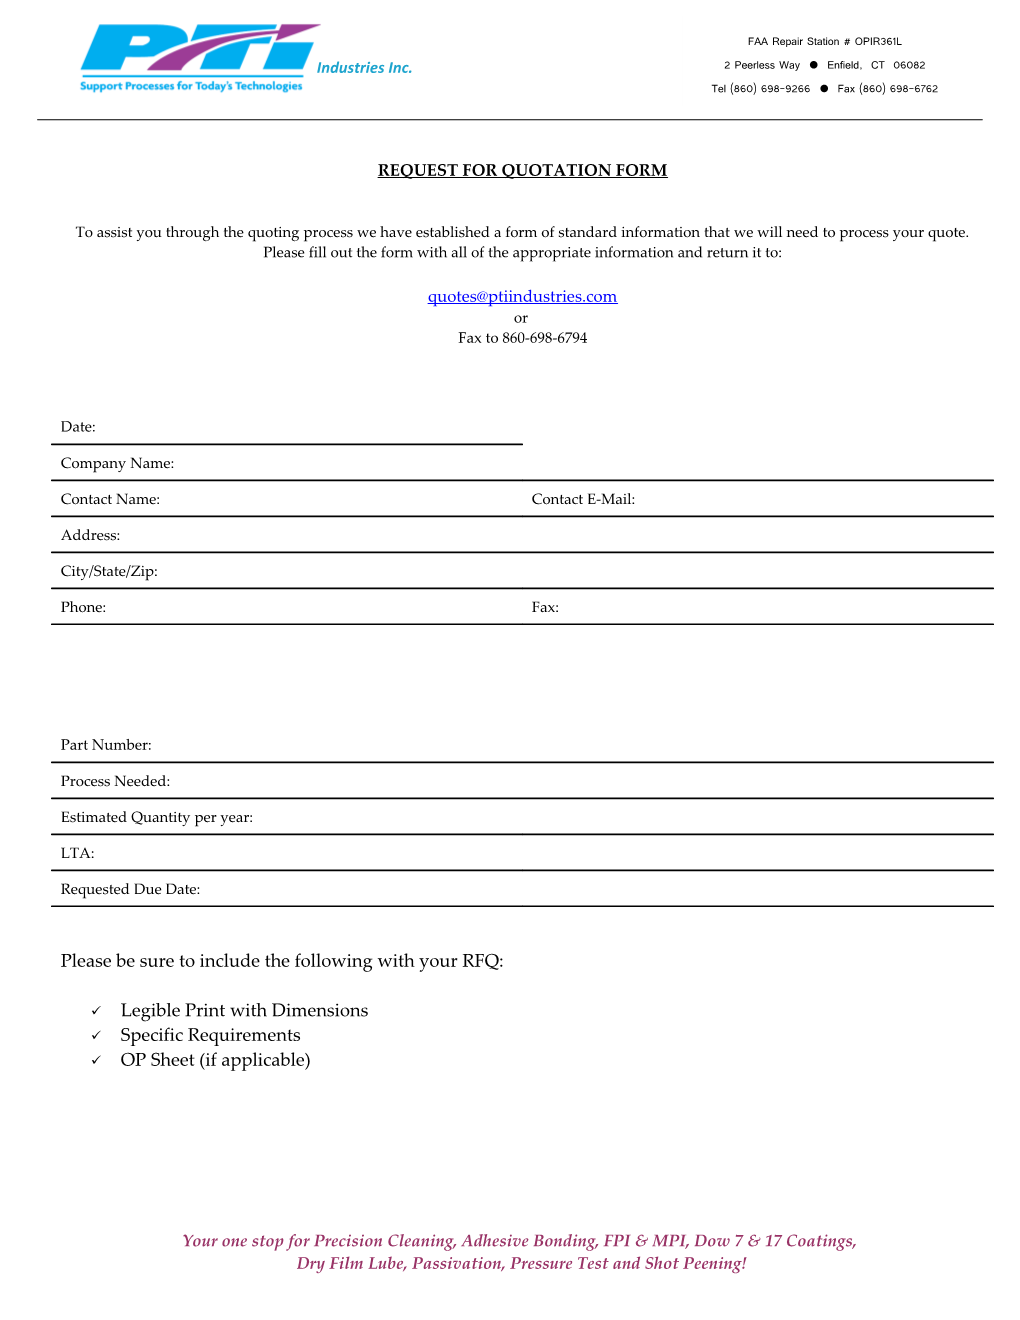 Request for Quotation Form